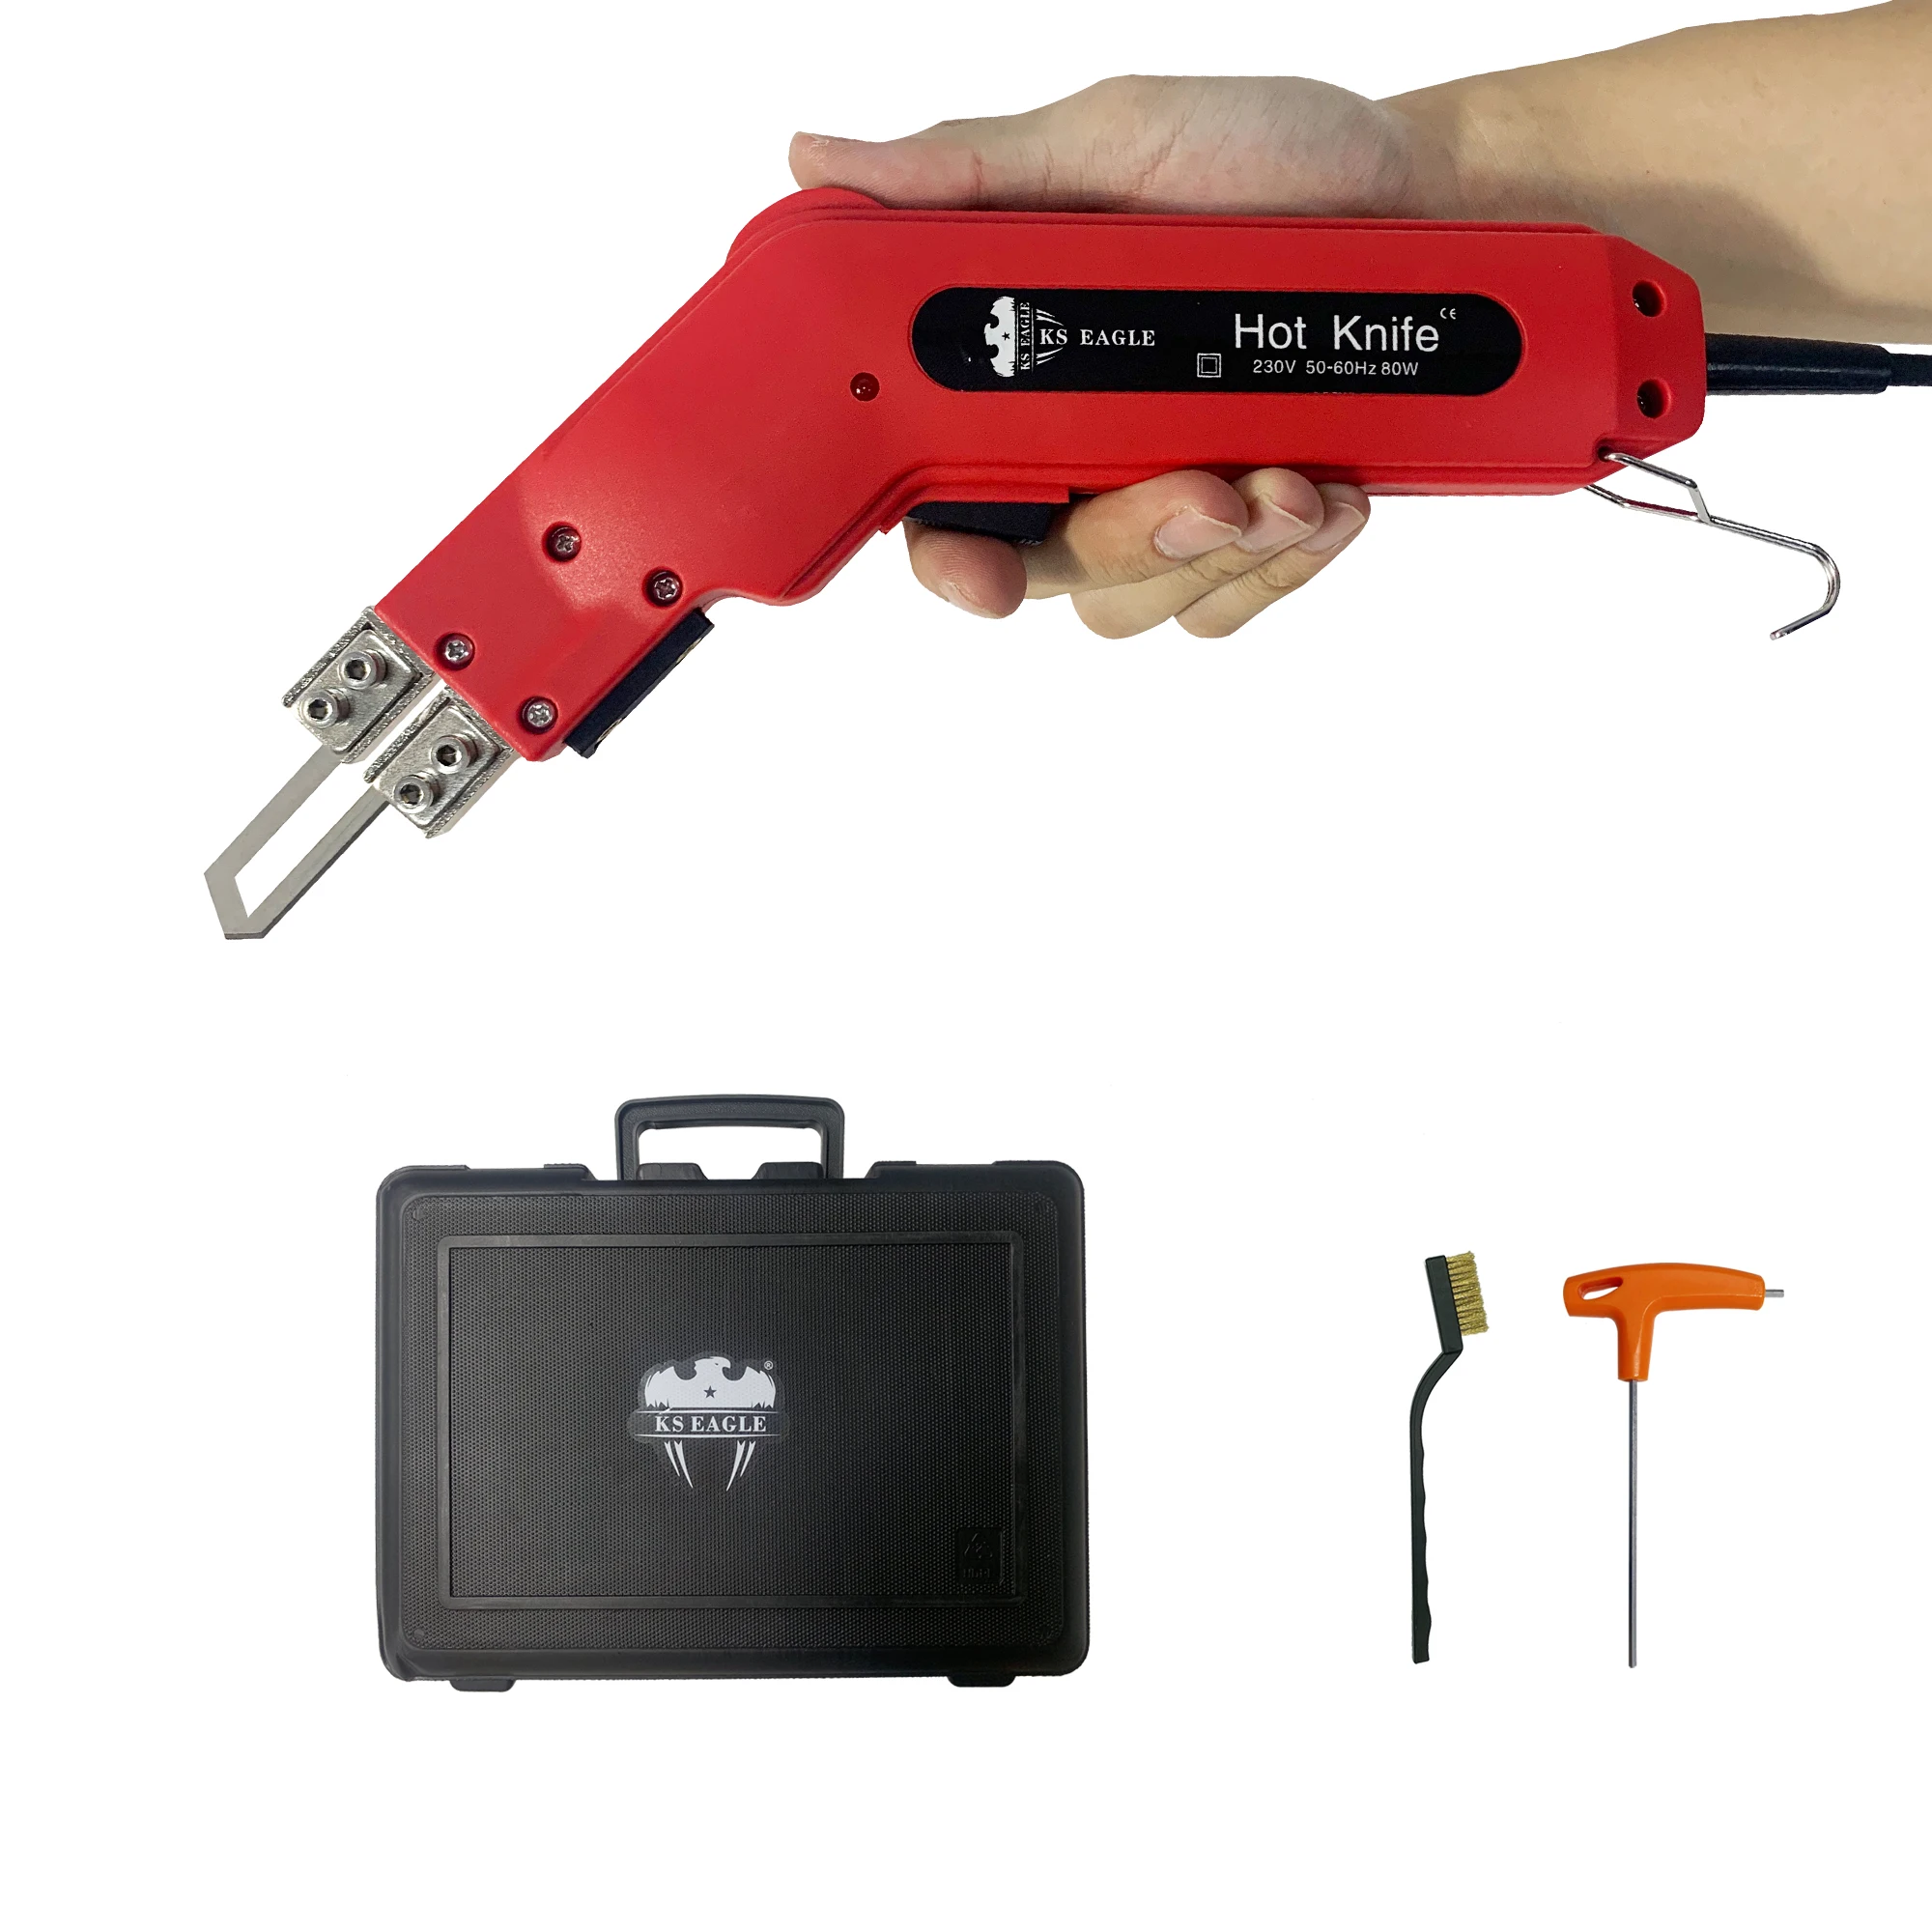 c200 hand held infrared camera resolution 256x192 ground heating pipeline and heat loss detecti infrared thermal imager KS EAGLE Electric Hot Knife Thermal Cutter Hand Held Heat Cutter Foam Cutting Tools Non-Woven Fabric Rope Curtain Heating Knife